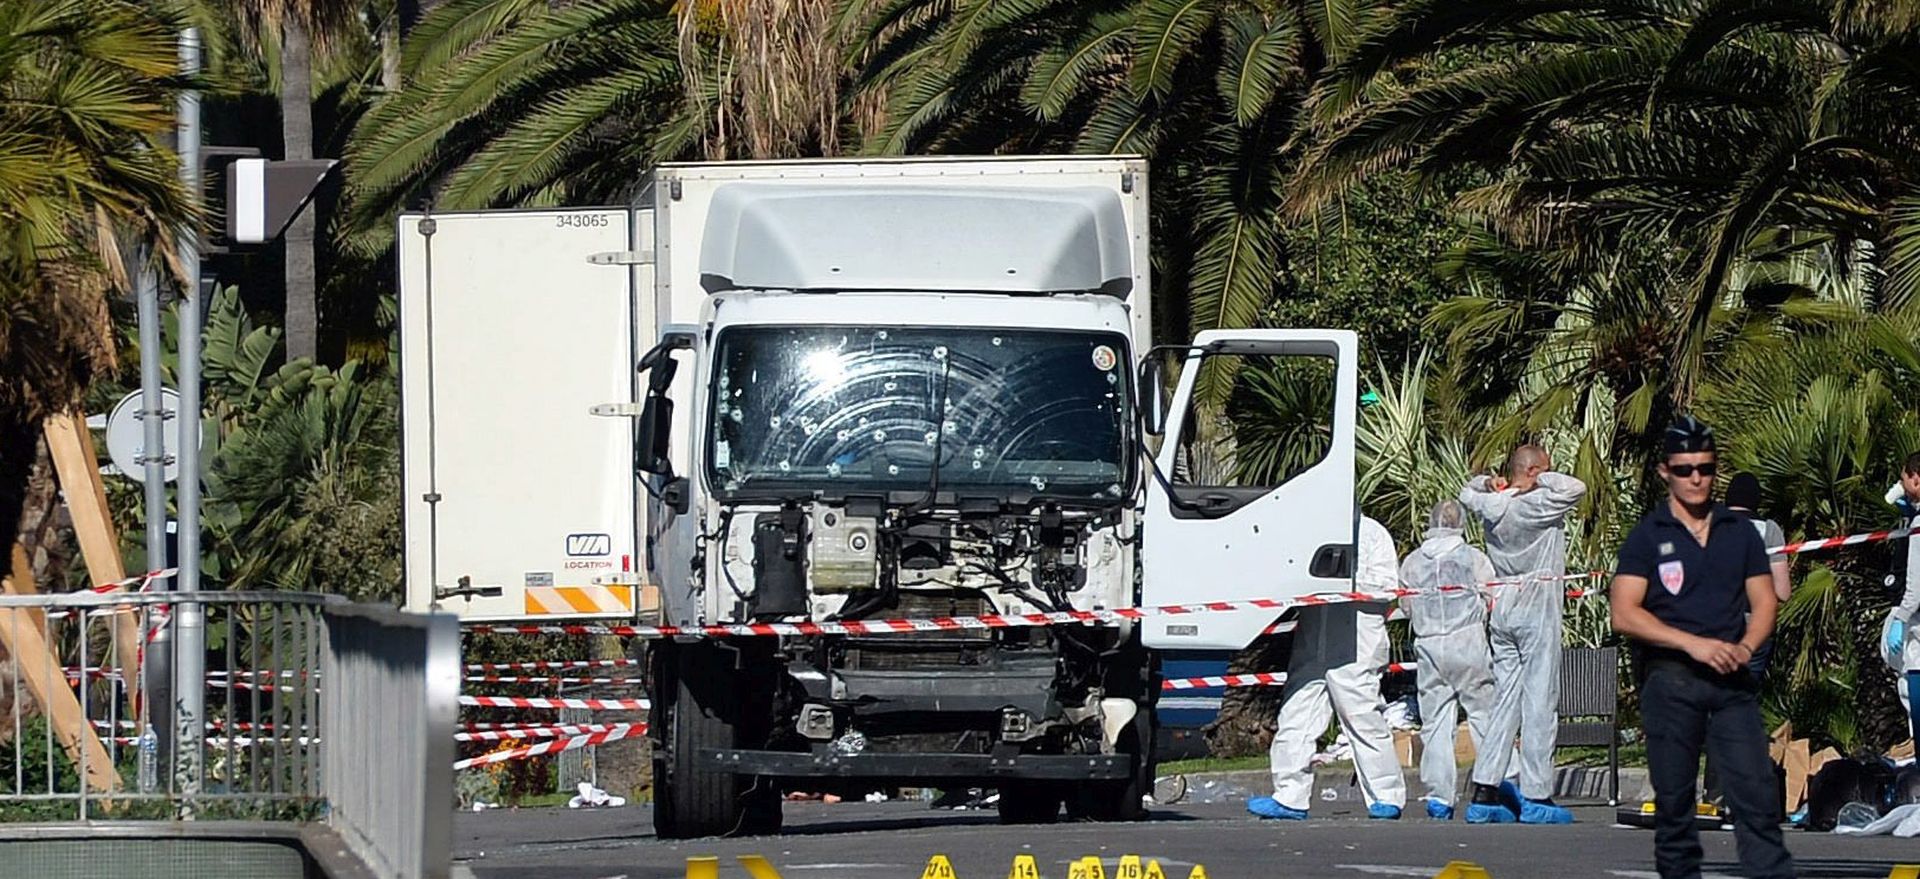 epa05426298 Police secure the area where a truck drove into a crowd during Bastille Day celebrations in Nice, France, 15 July 2016. According to reports, at least 84 people died and many were injured after a truck drove into the crowd on the famous Promenade des Anglais during celebrations of Bastille Day in Nice, late 14 July. Anti-terrorism police took over the investigation in the incident, media added.  EPA/ANDREAS GEBERT